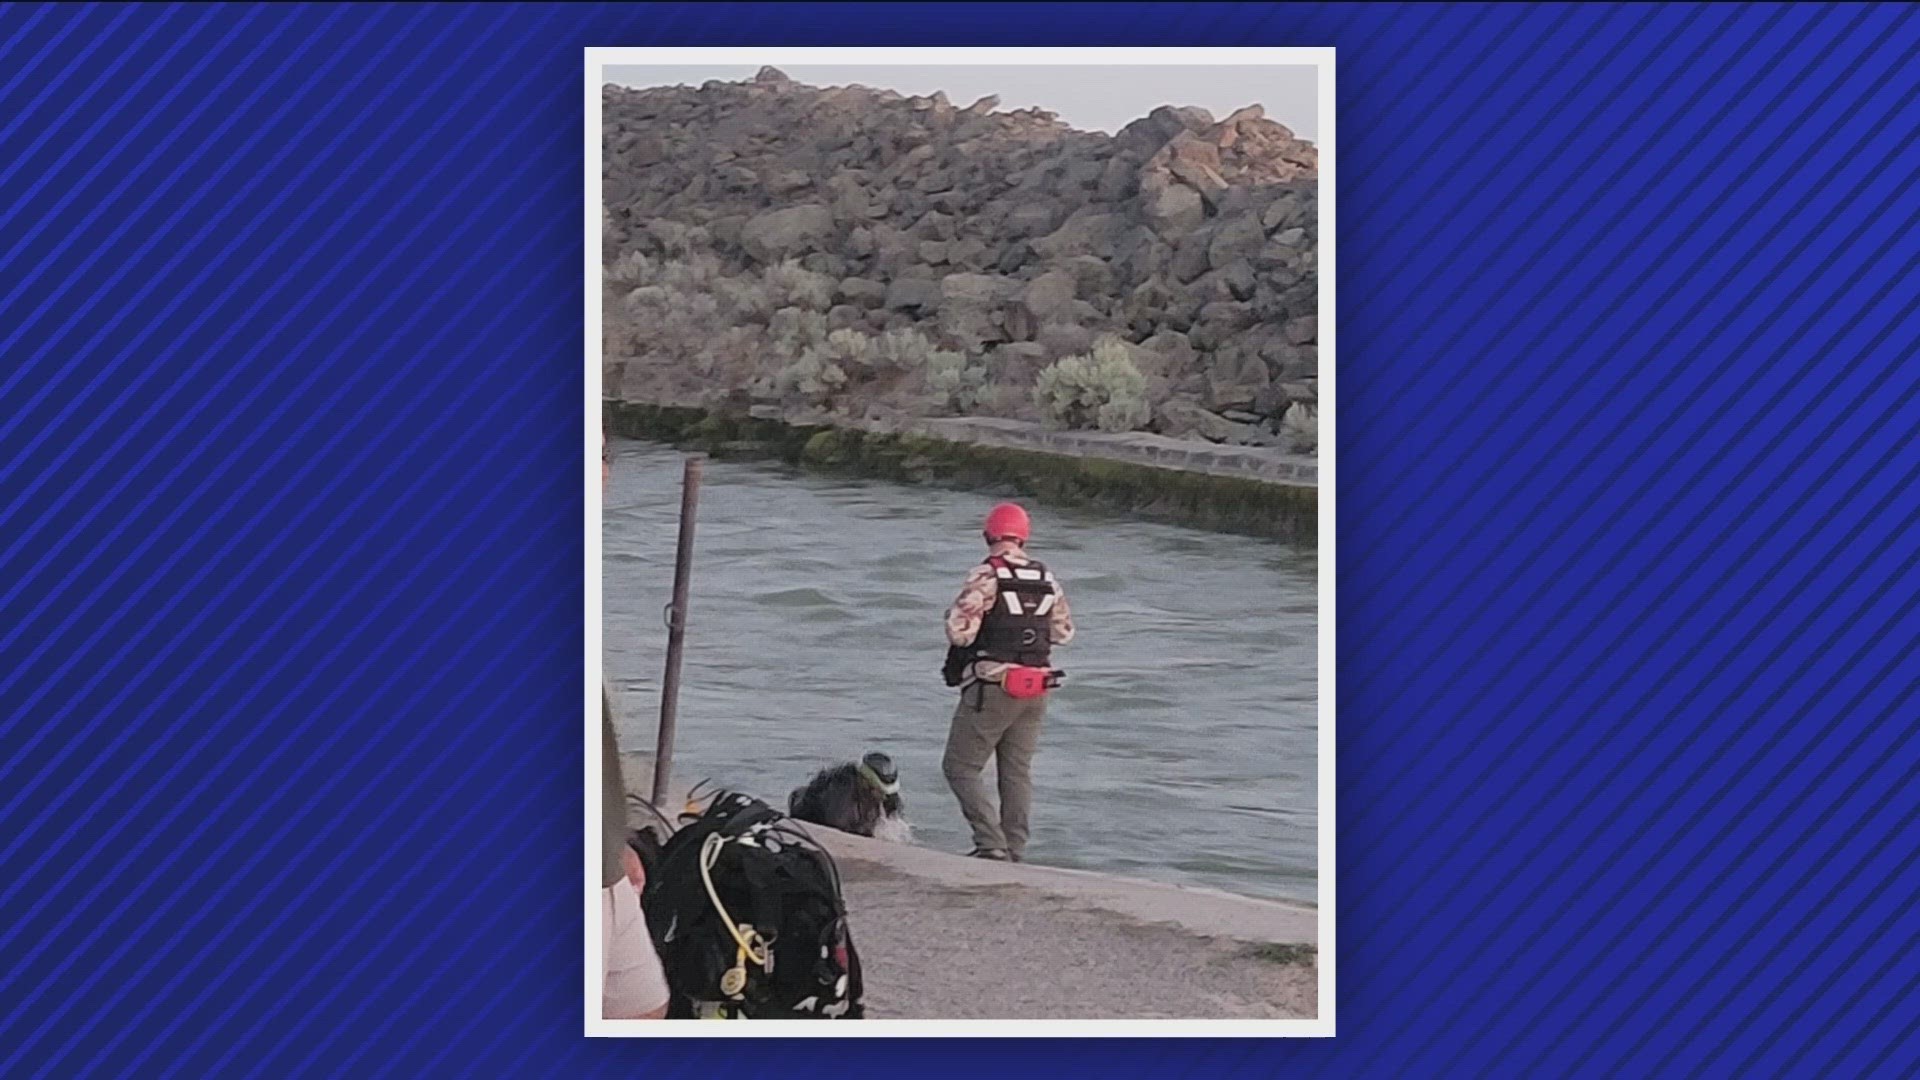 Twin Falls Sheriff's Office reminds people it is an "extremely dangerous area to swim."